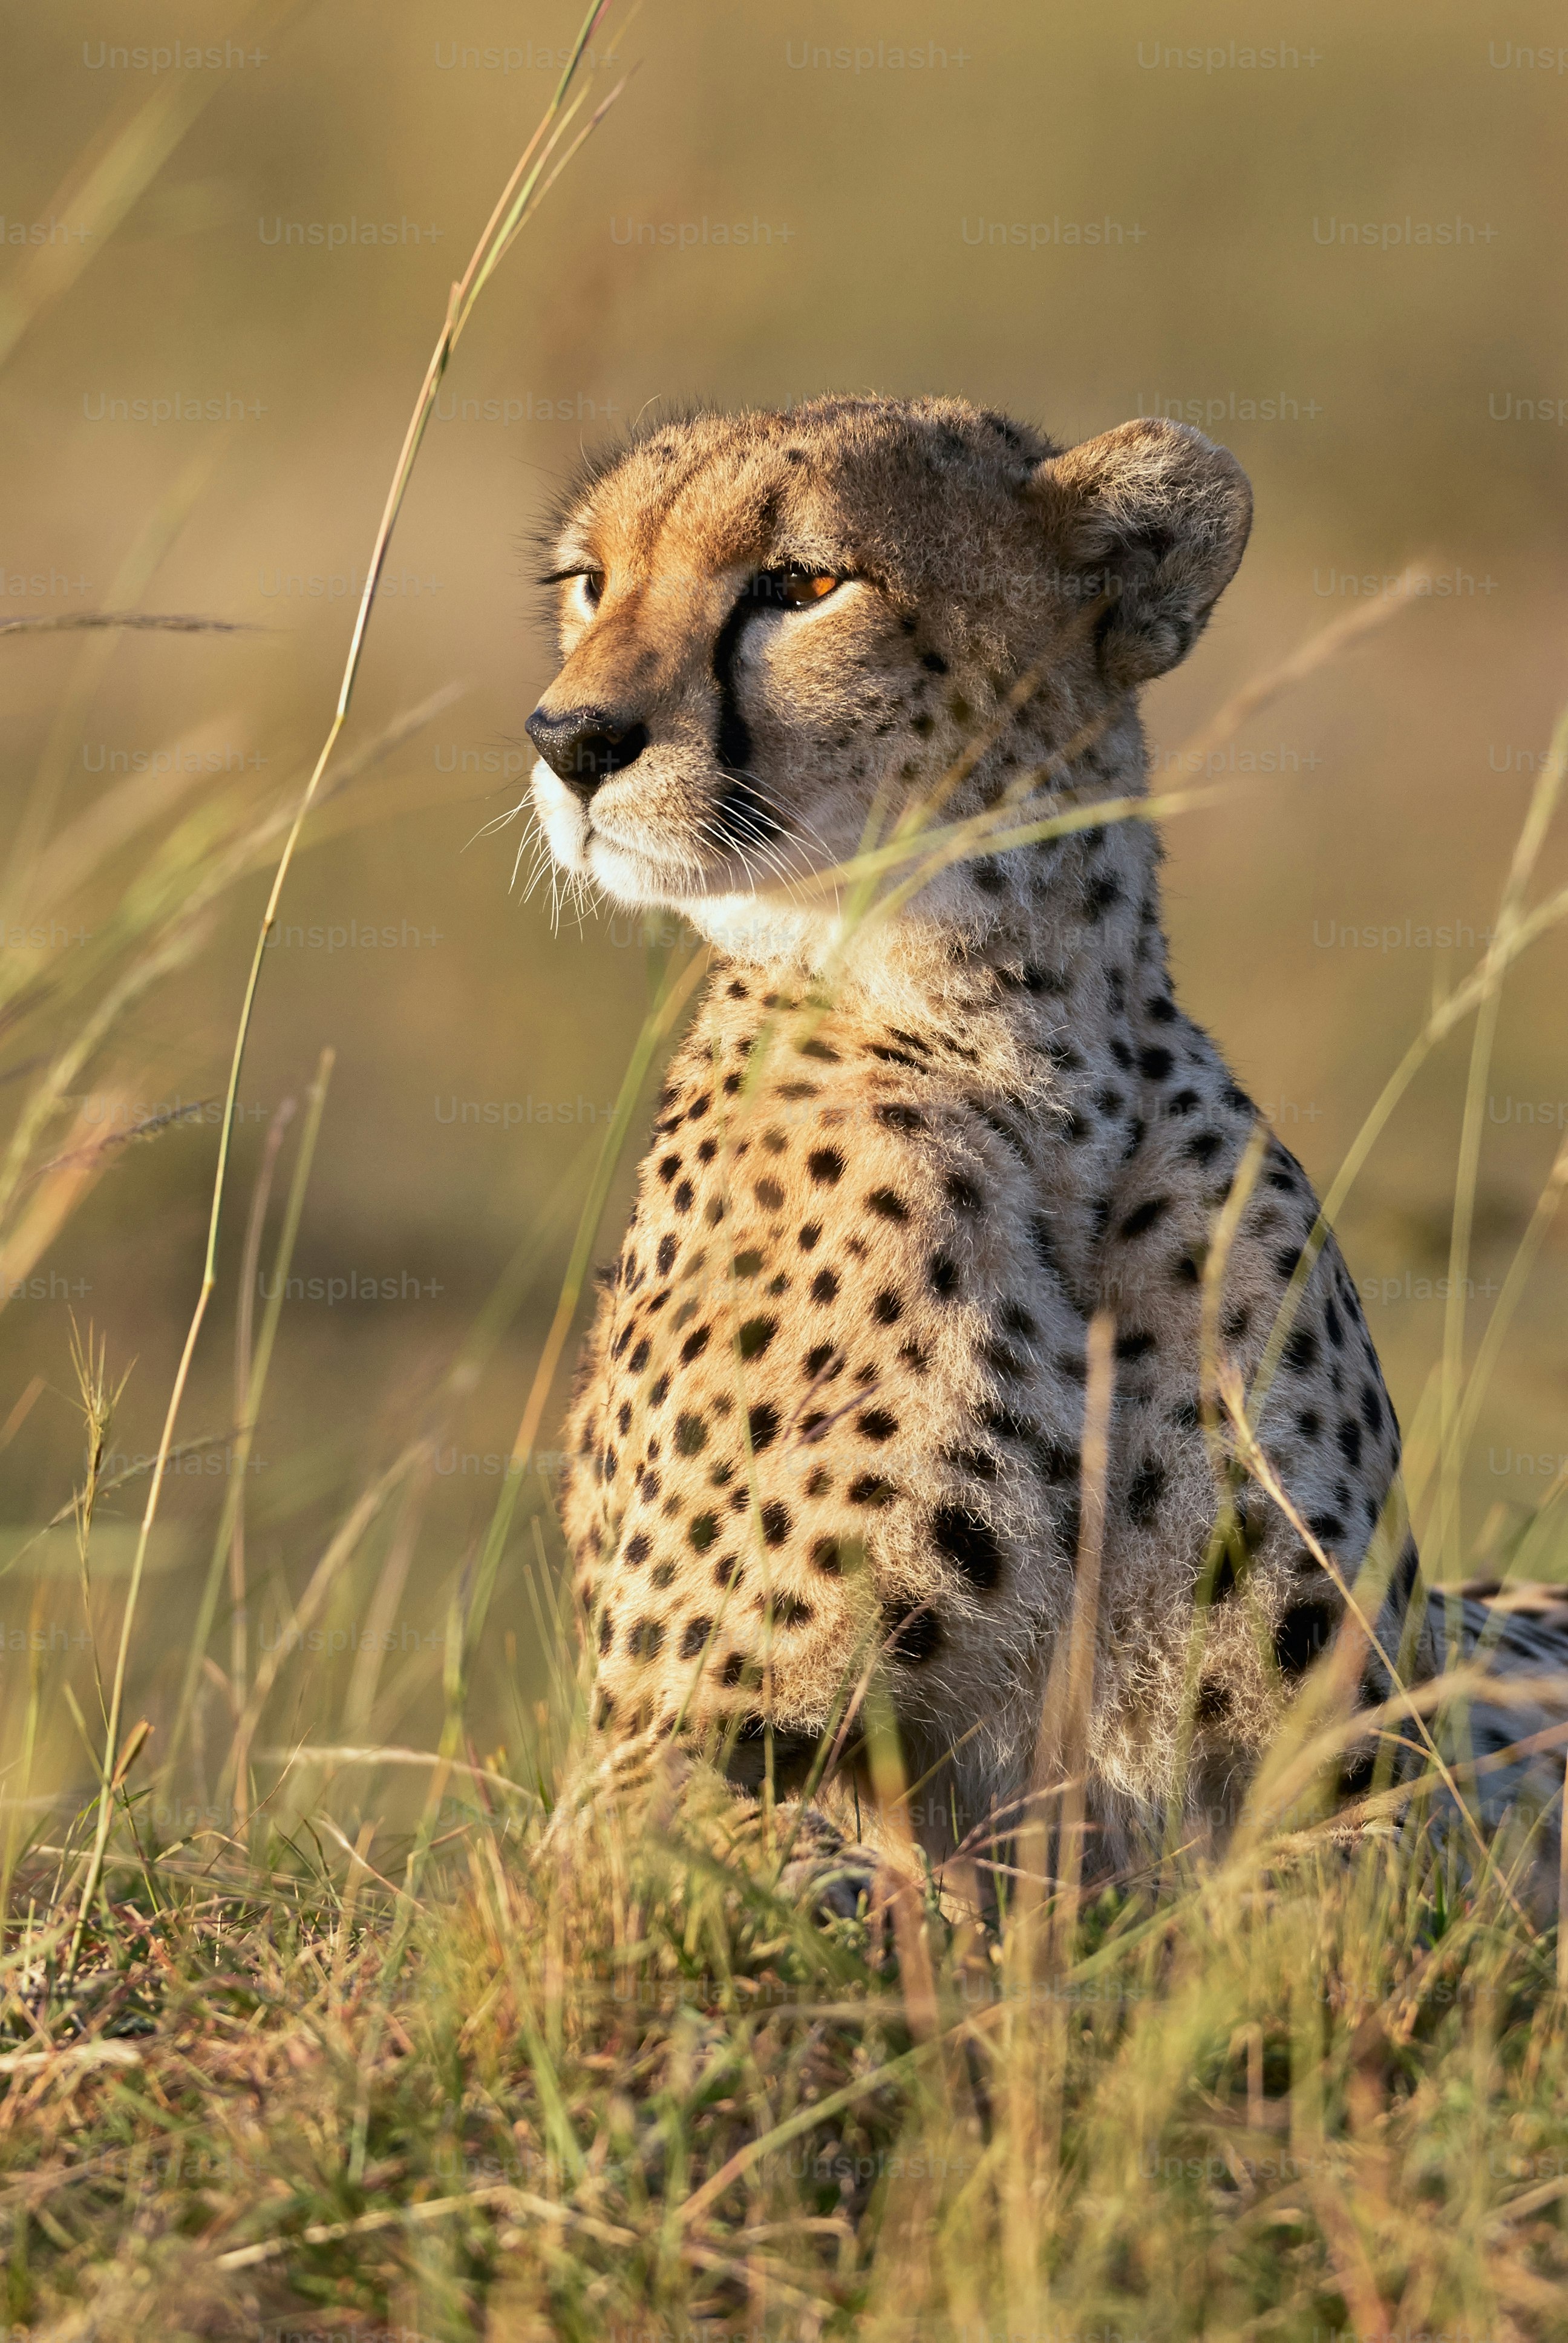 The fastest animal on earth is also one of the prettiest, so don't settle for less than gorgeous cheetah pictures. Unsplash has a massive collection of the finest cheetah pictures on the web, and you can use them for free!